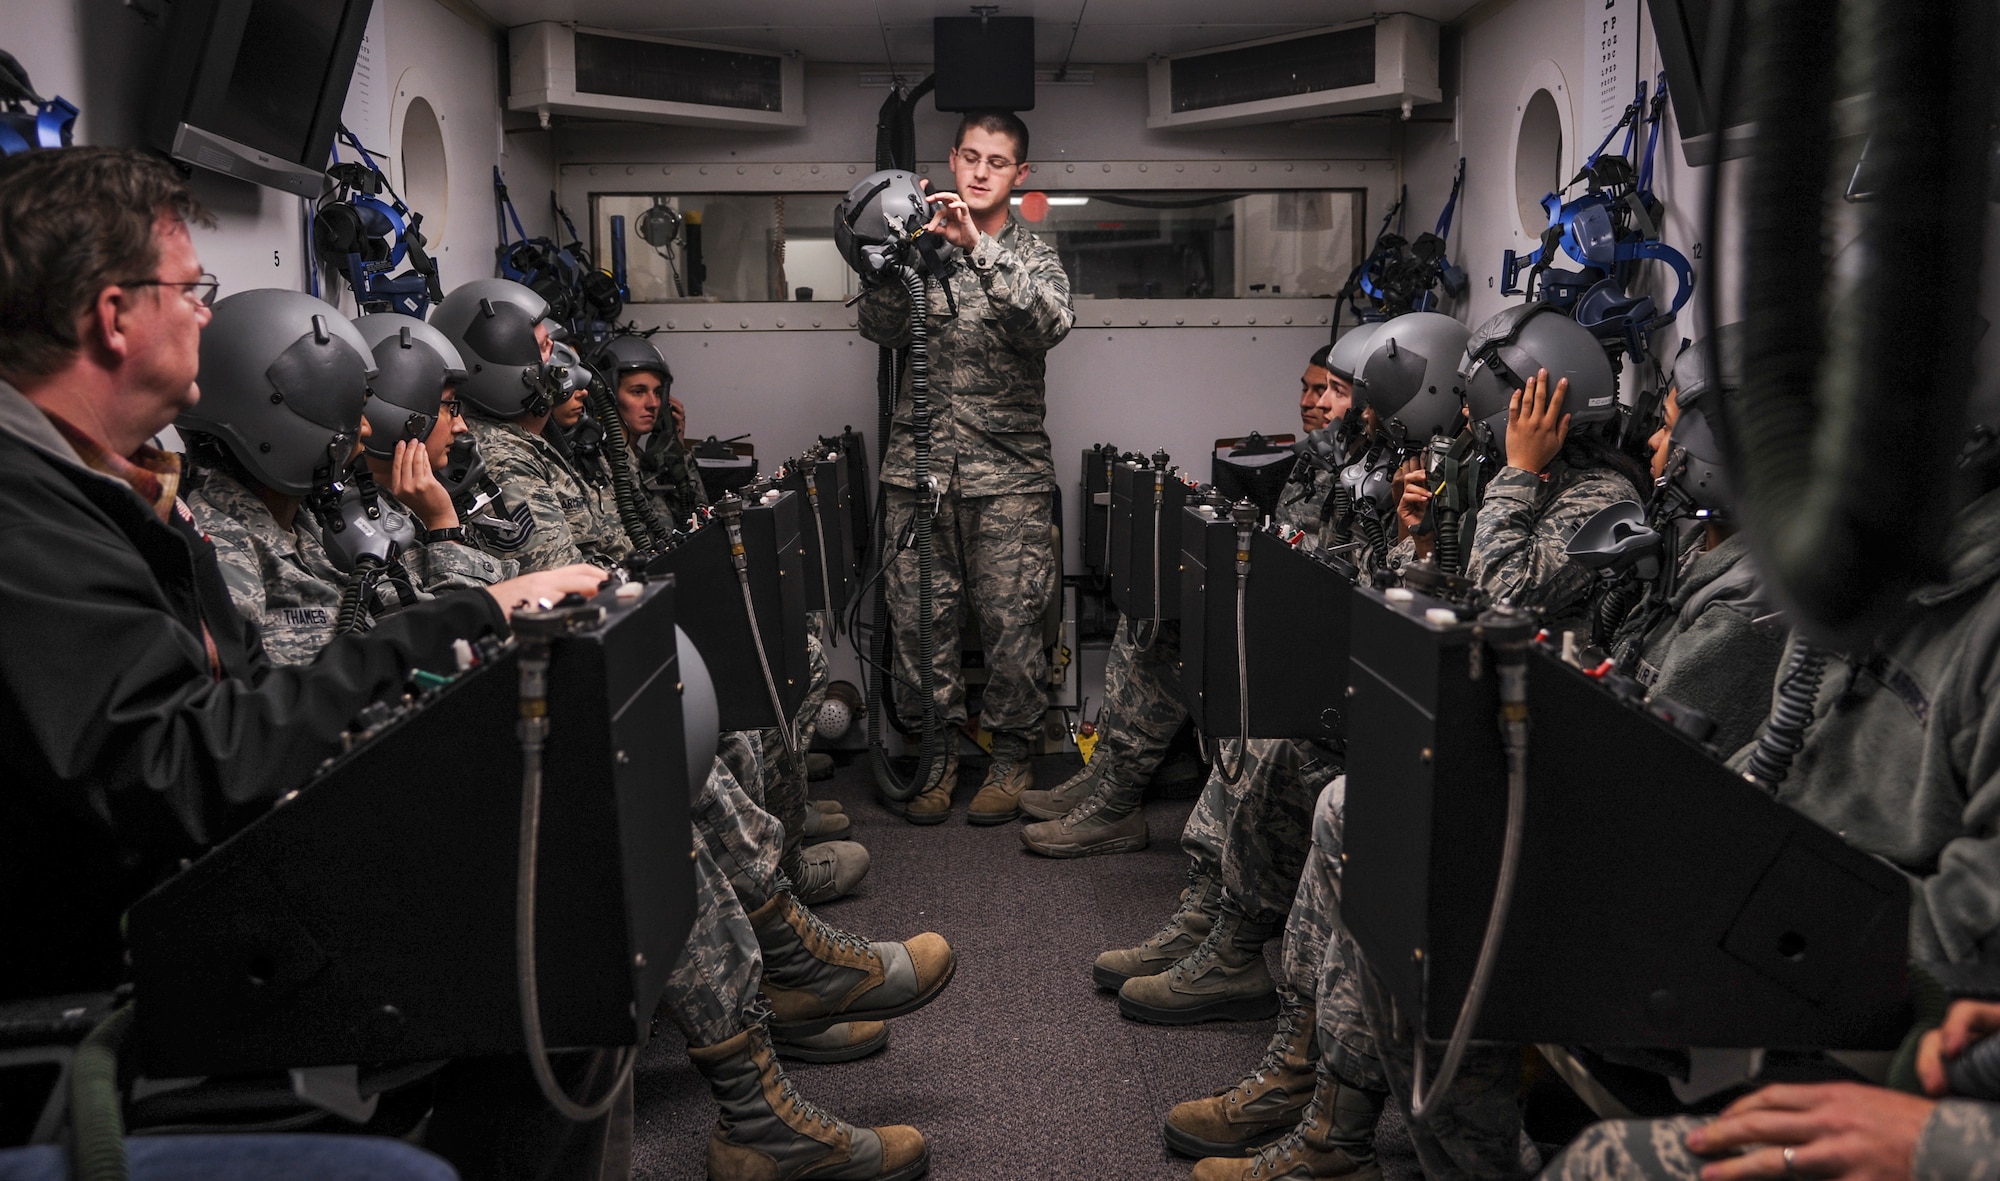 Senior Airman Devin Theis instructs Airmen on the proper use of an oxygen mask during altitude training Dec. 8, 2014, at Little Rock Air Force Base, Ark. Students undergo hypobaric chamber training to experience the effects high altitude has on the body, which include low oxygen levels. Theis is a 19th Aerospace Medicine Squadron high altitude airdrop missions technician. (U.S. Air Force photo/Airman 1st Class Harry Brexel)